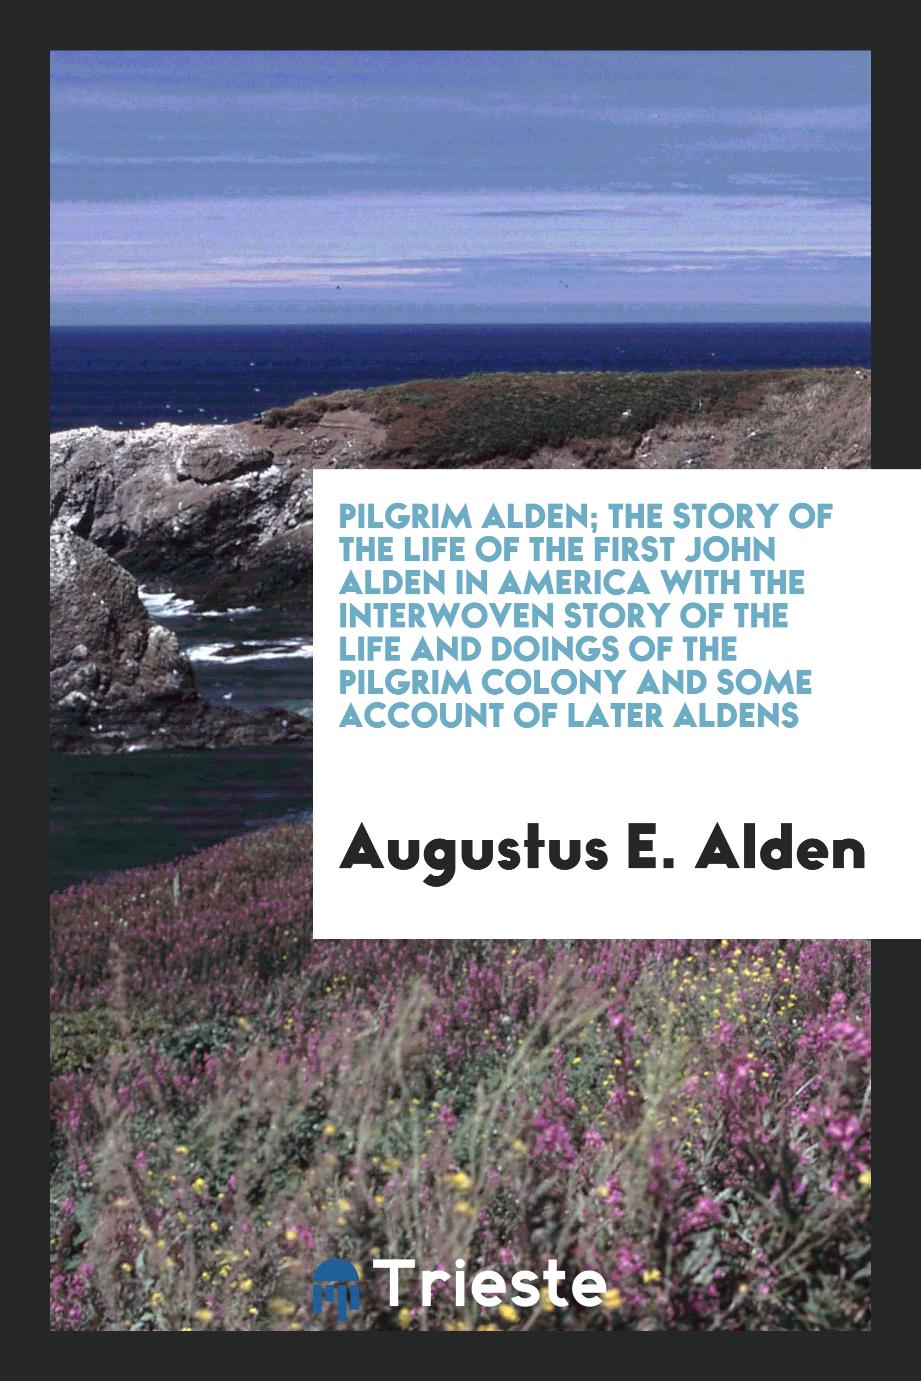 Pilgrim Alden; the story of the life of the first John Alden in America with the interwoven story of the life and doings of the Pilgrim colony and some account of later Aldens